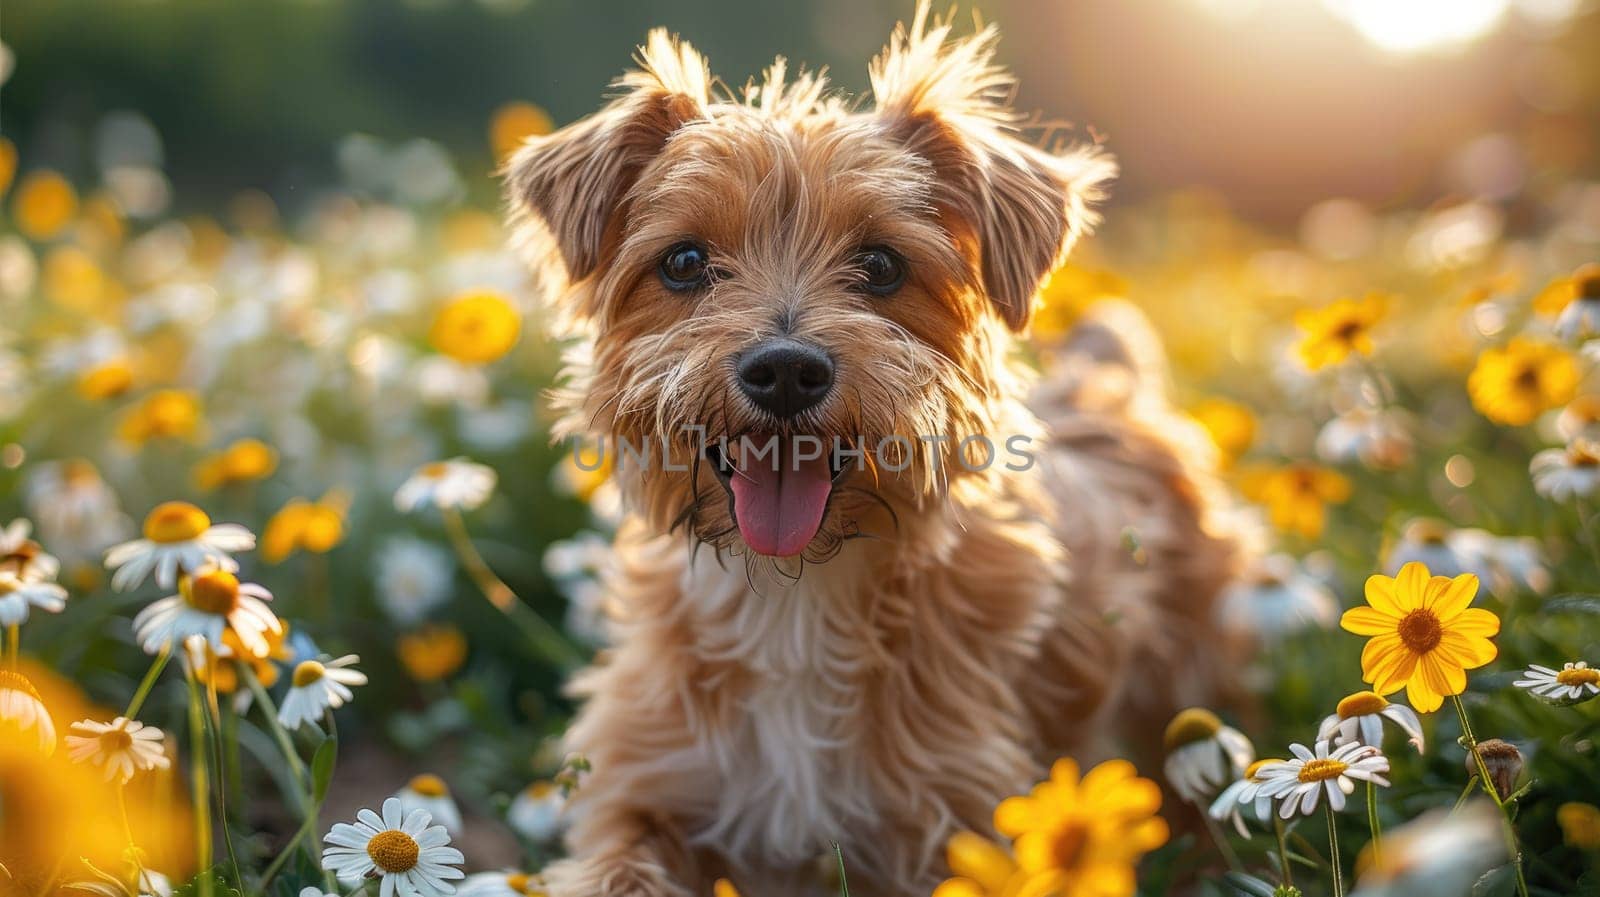 Summer background, A beautiful dog running in flower field in a sunny dreamy day.